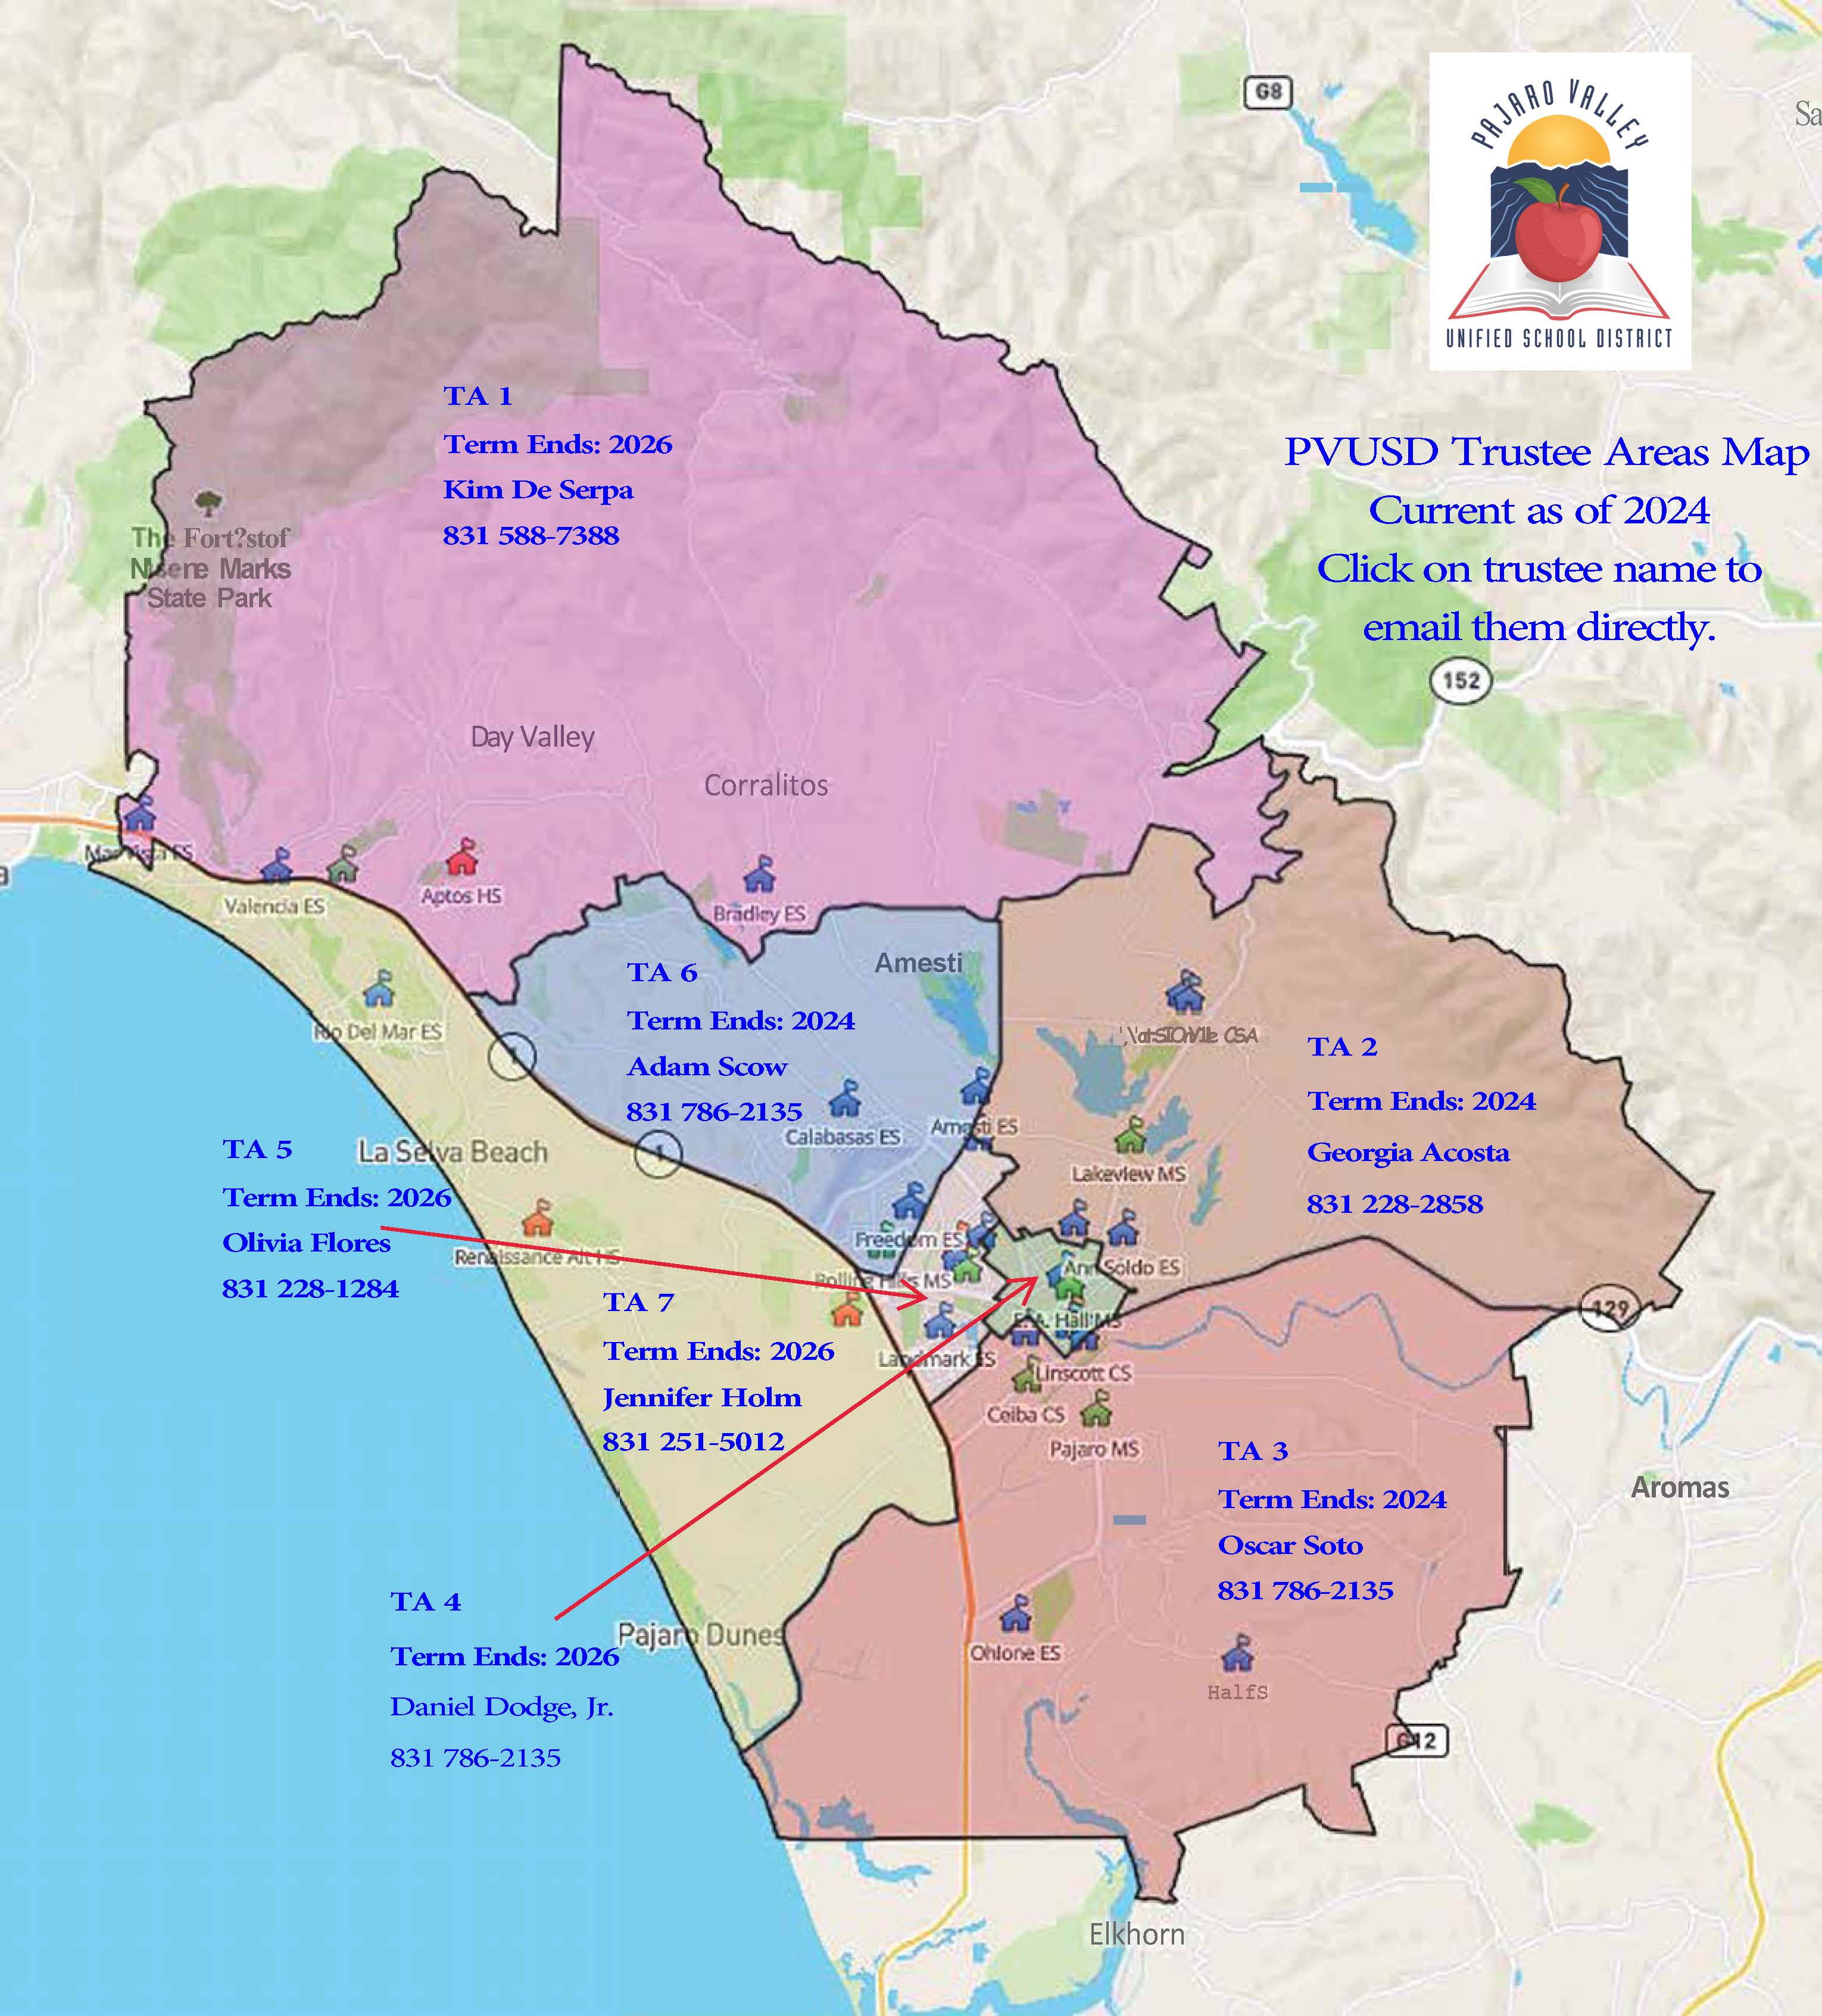 Email alicia_jimenez@pvusd for Board Trustee map information